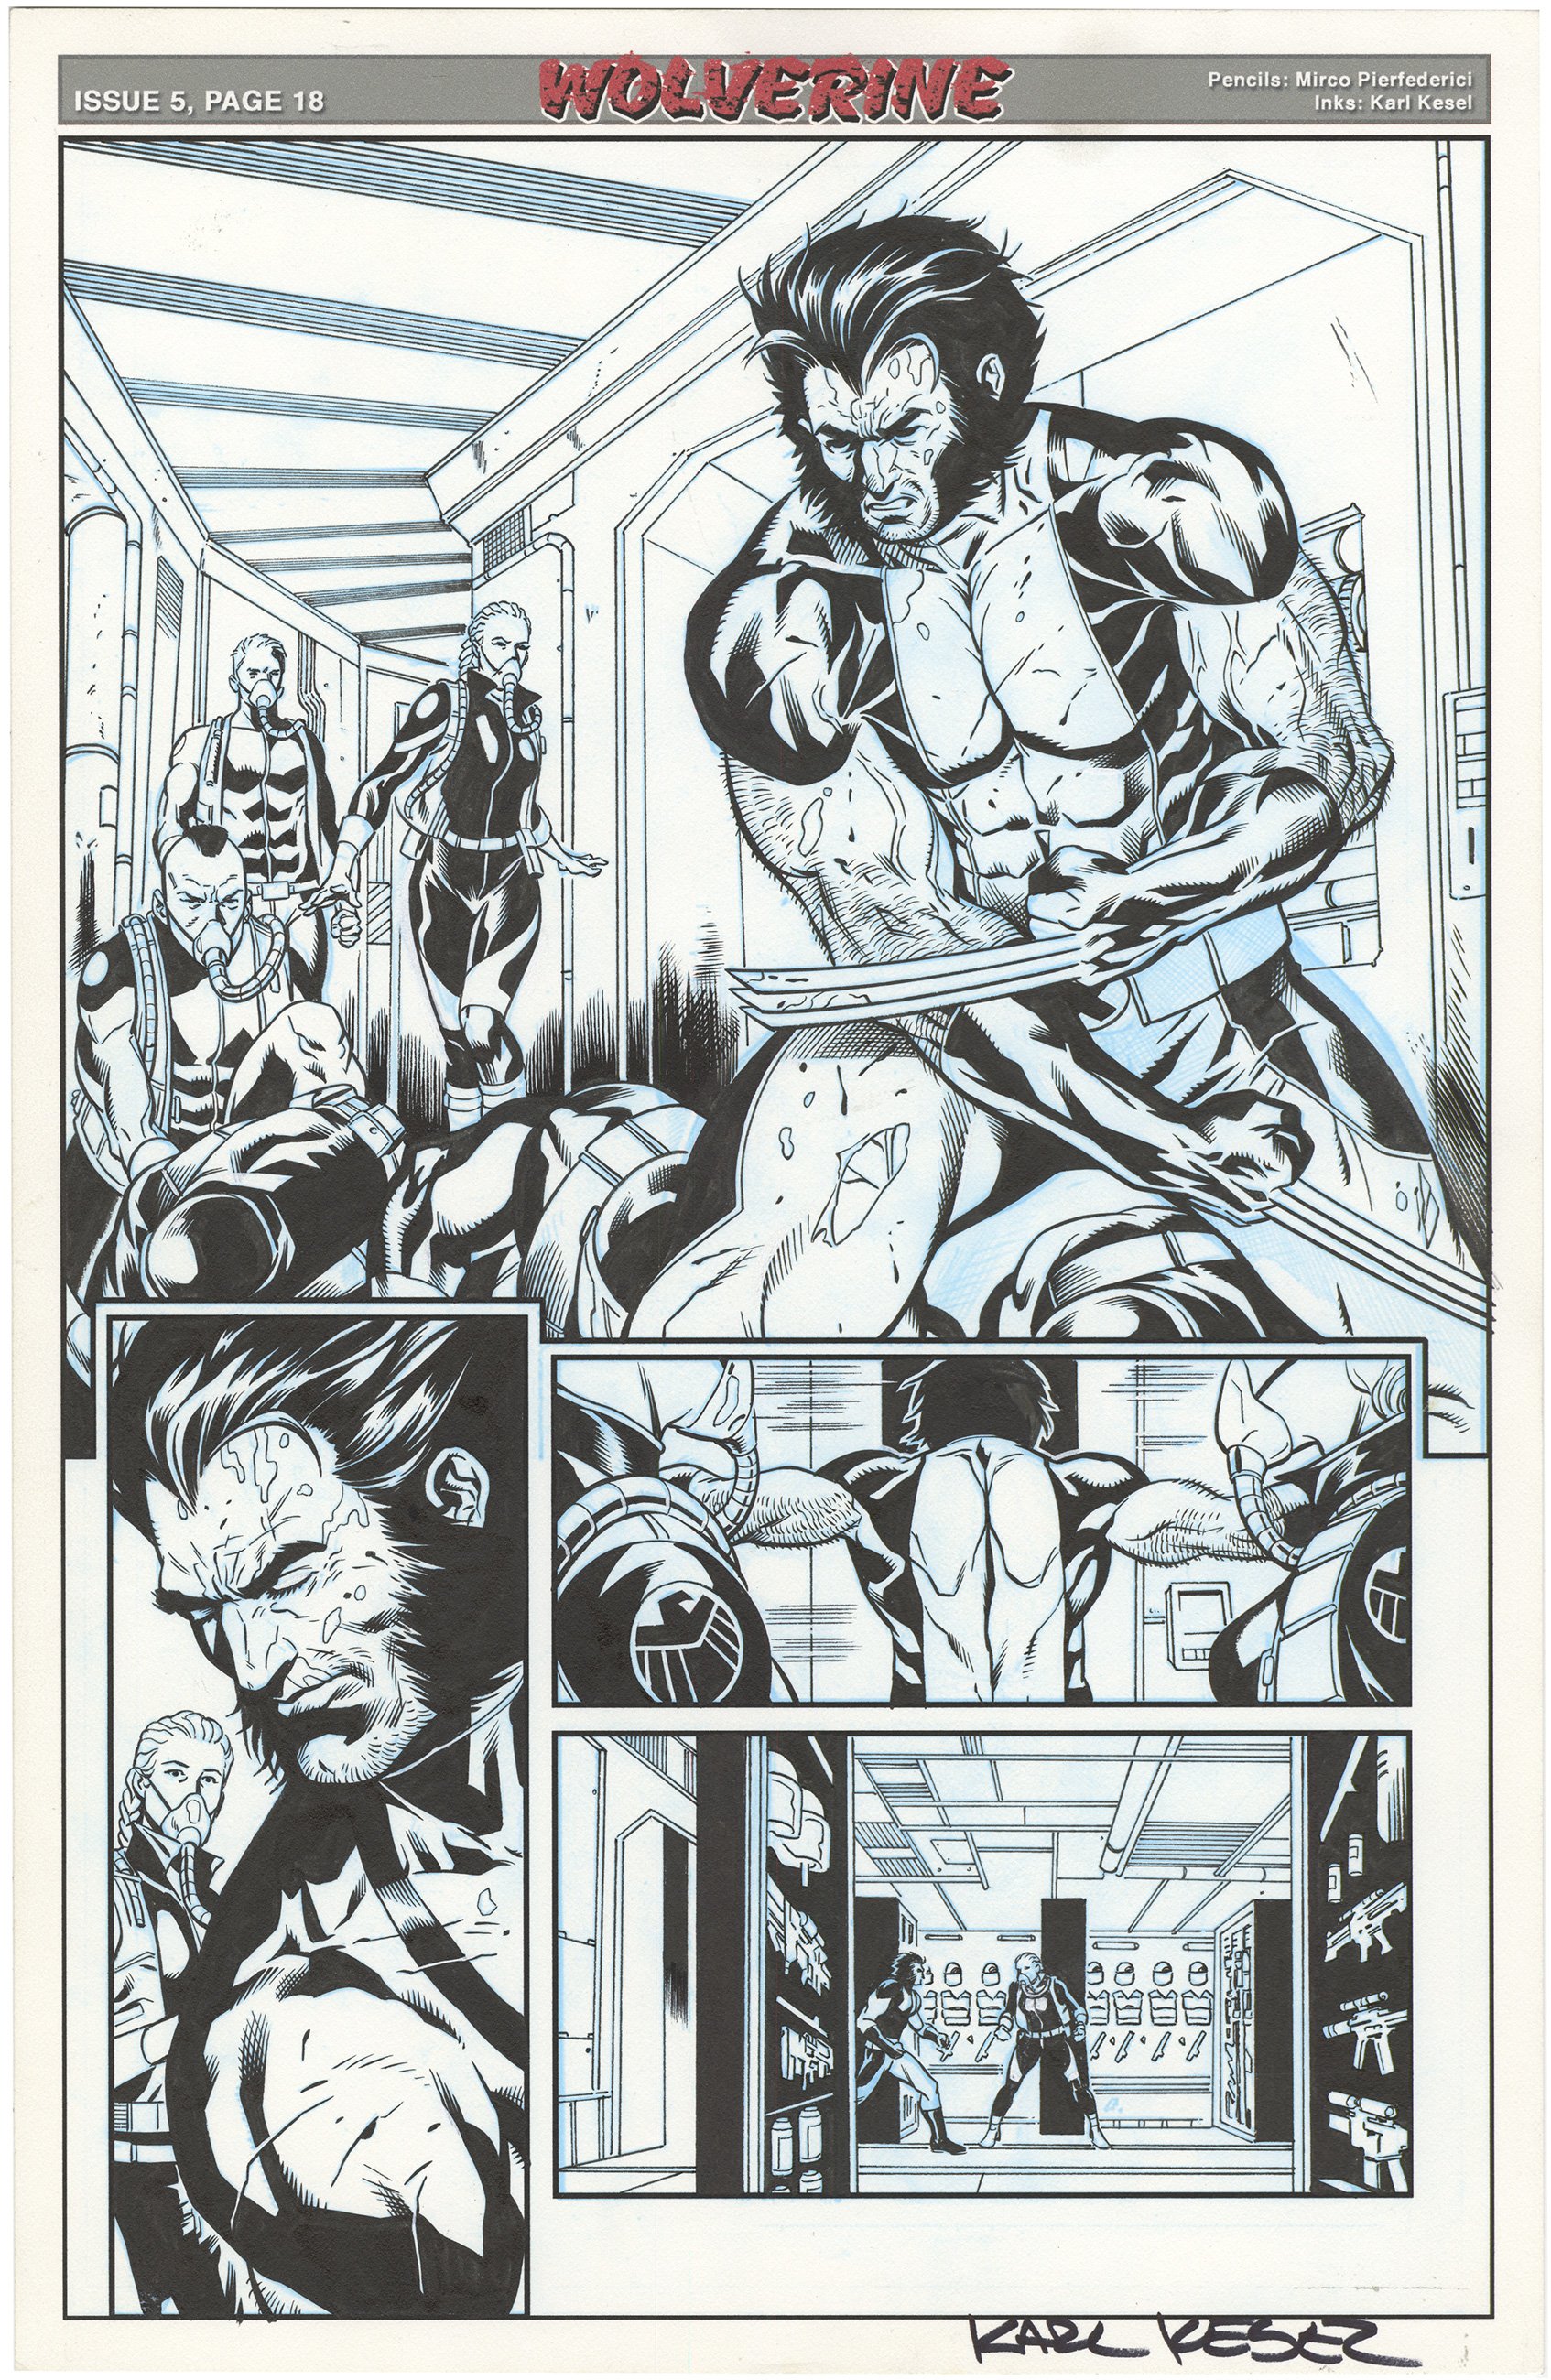 Art Adams Donates Wolverine Sketch for Jim Lee's Charity Auction